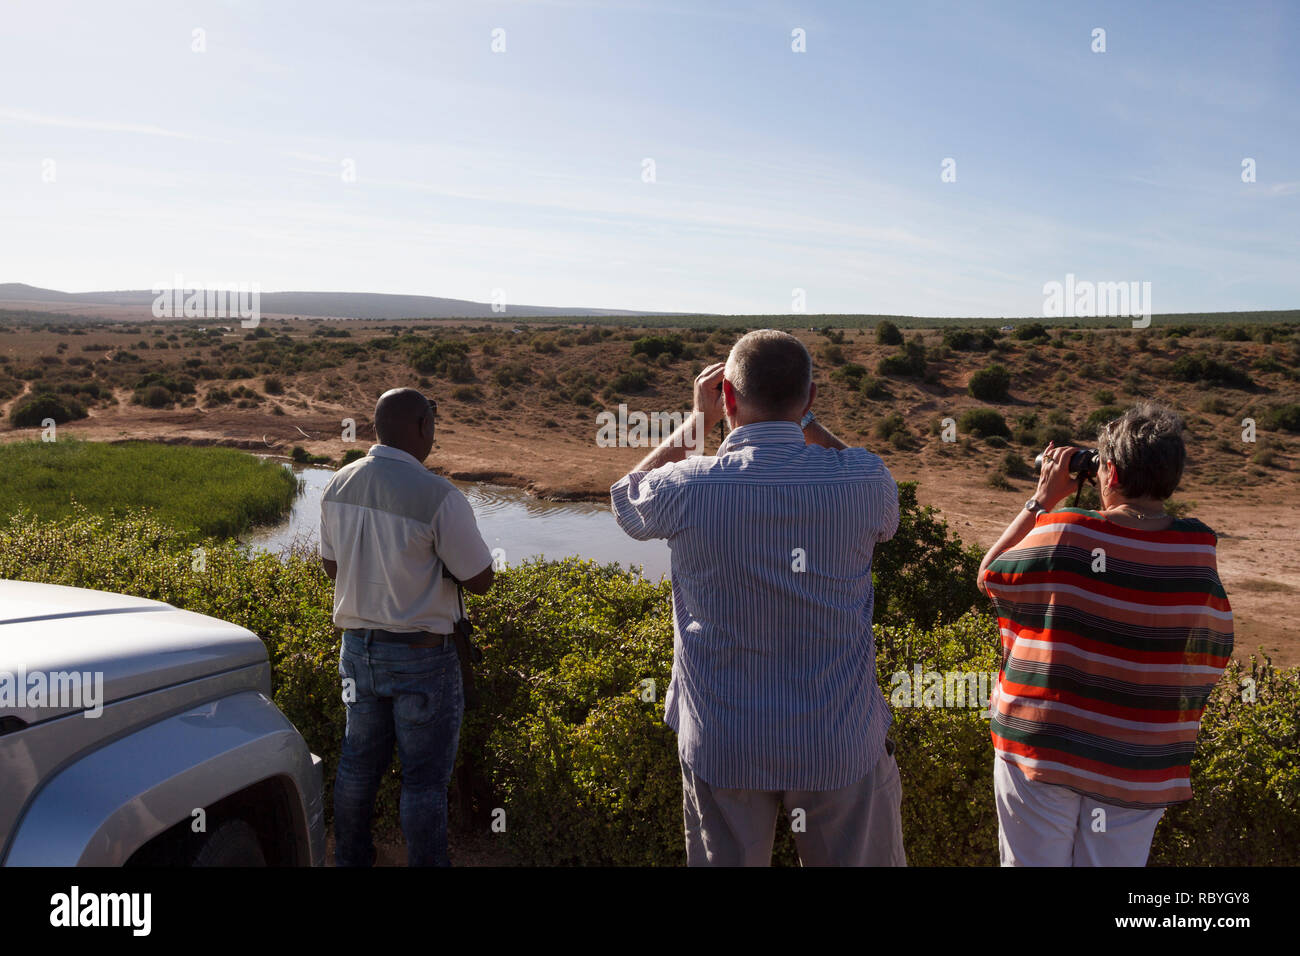 Tourists at Domkrag Dam lookout point, Addo Elephant National Park, South Africa Stock Photo